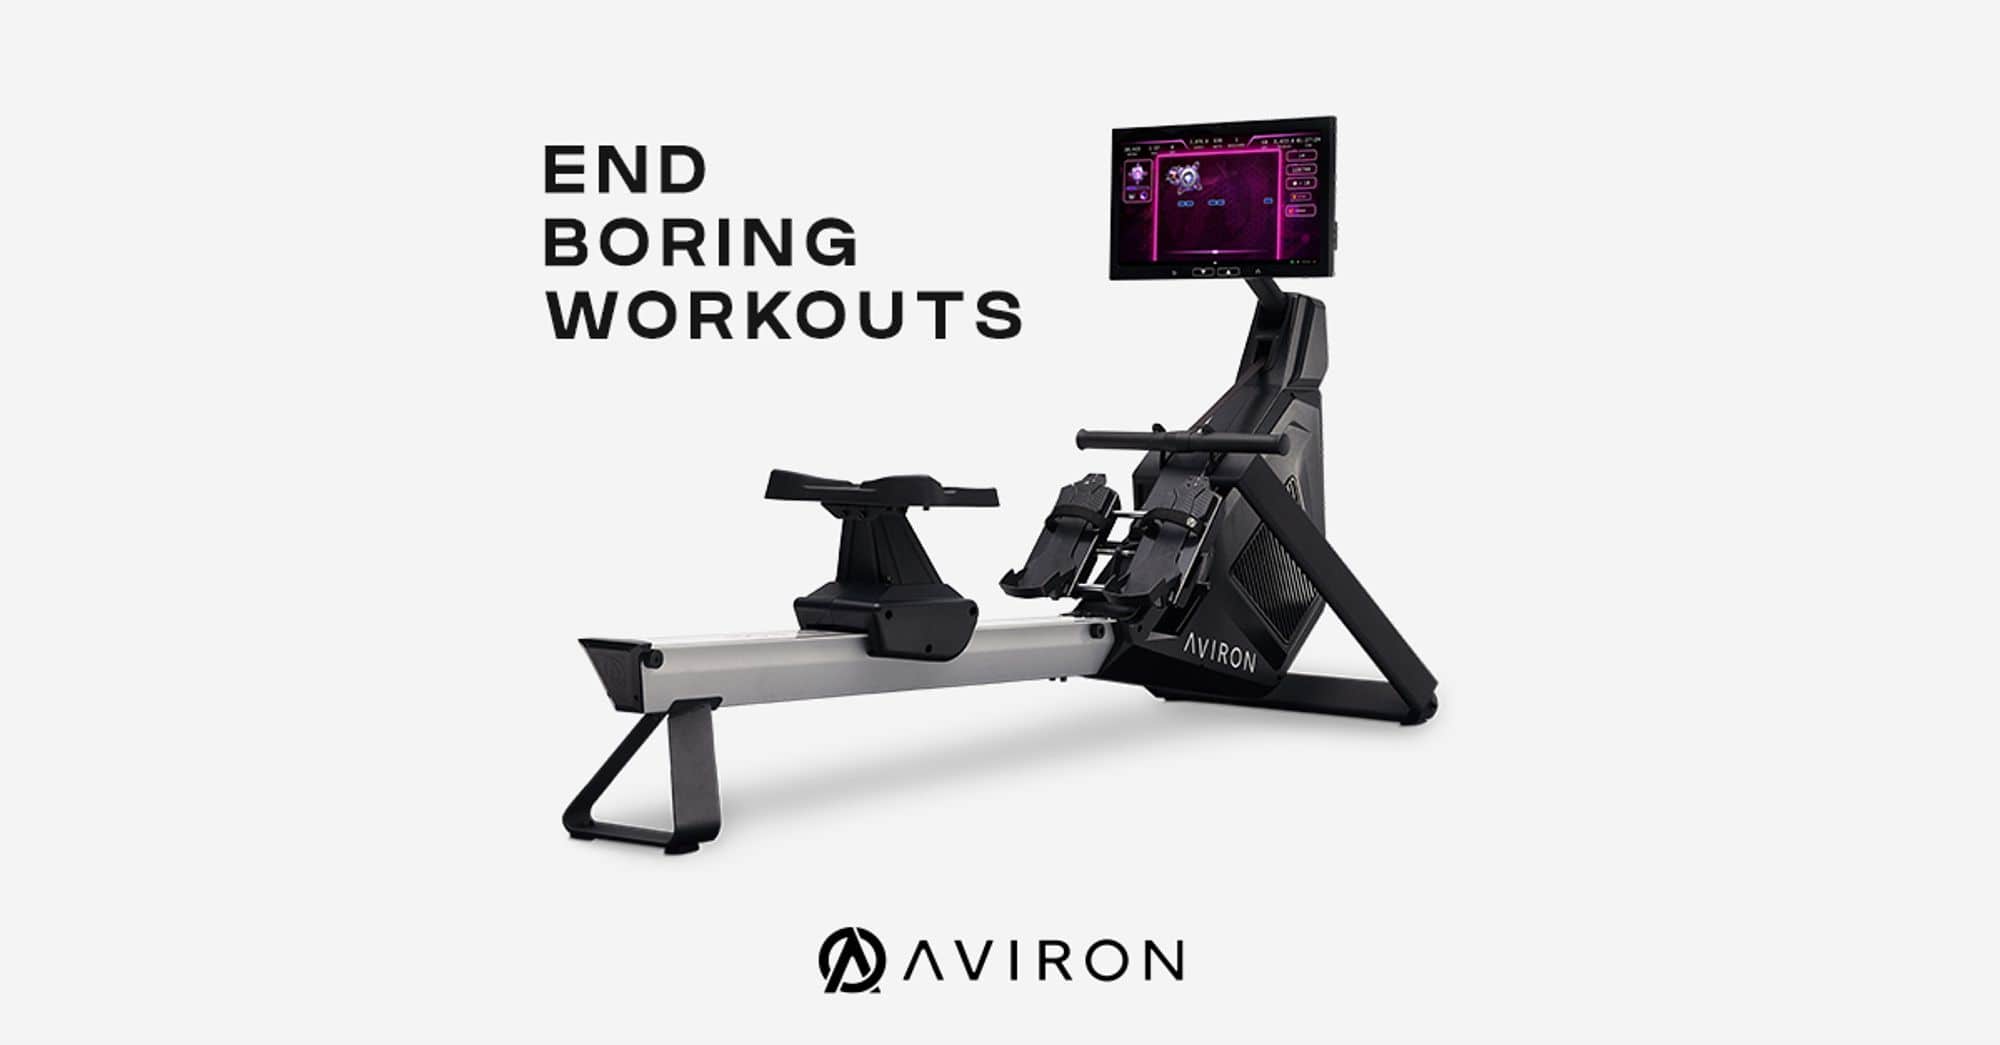 Experience the Best Home Interactive Rowing Machine